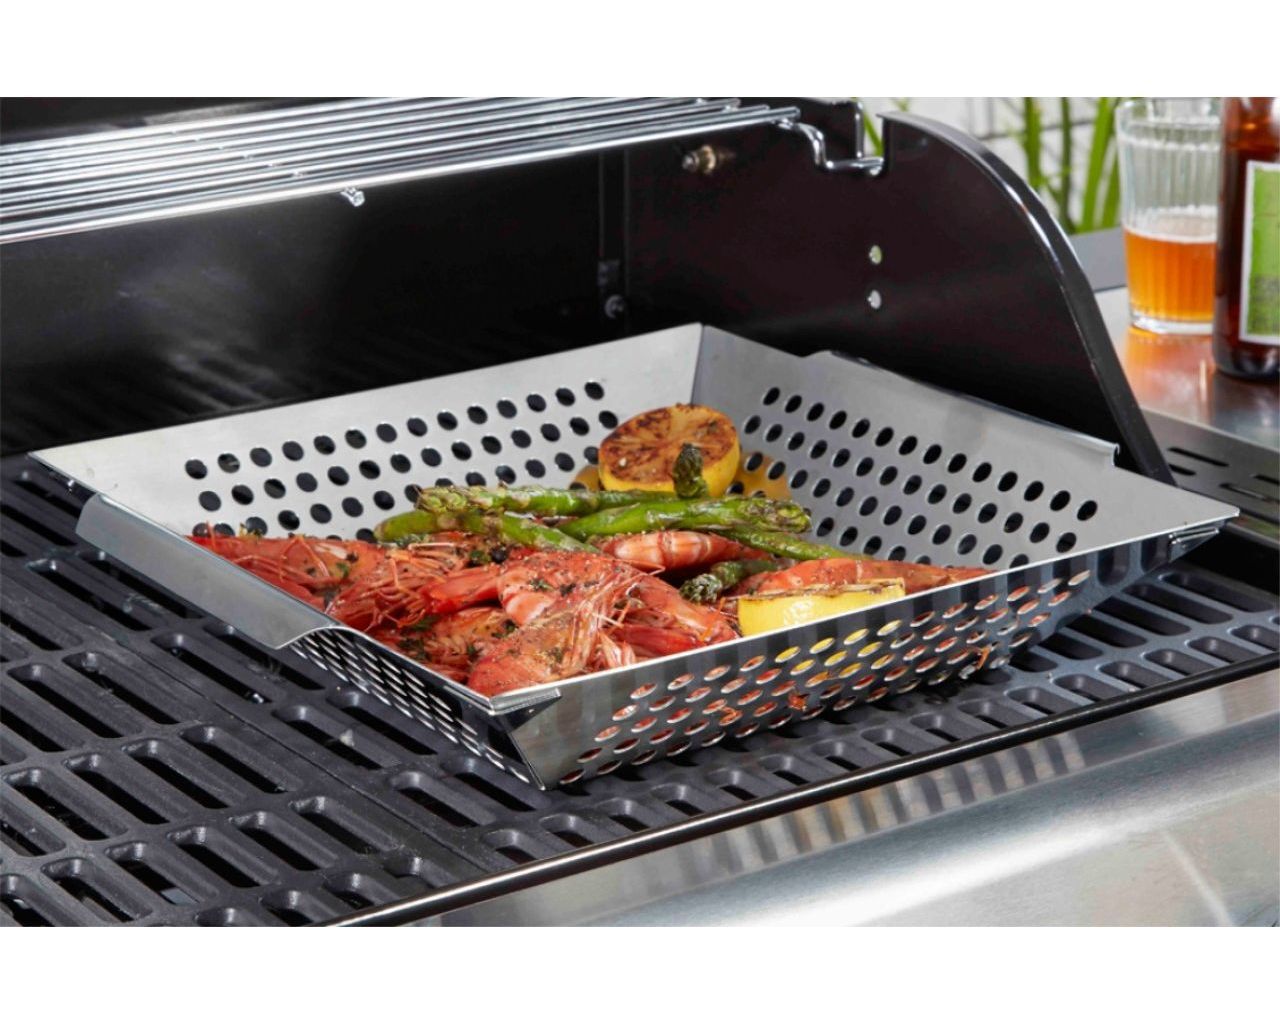 soldbbq Stainless Steel Grill Vegetable Basket Replaces Part by BAC273 for Select Traeger Wood Pellt Grill Models,16 w x 11.5 D 